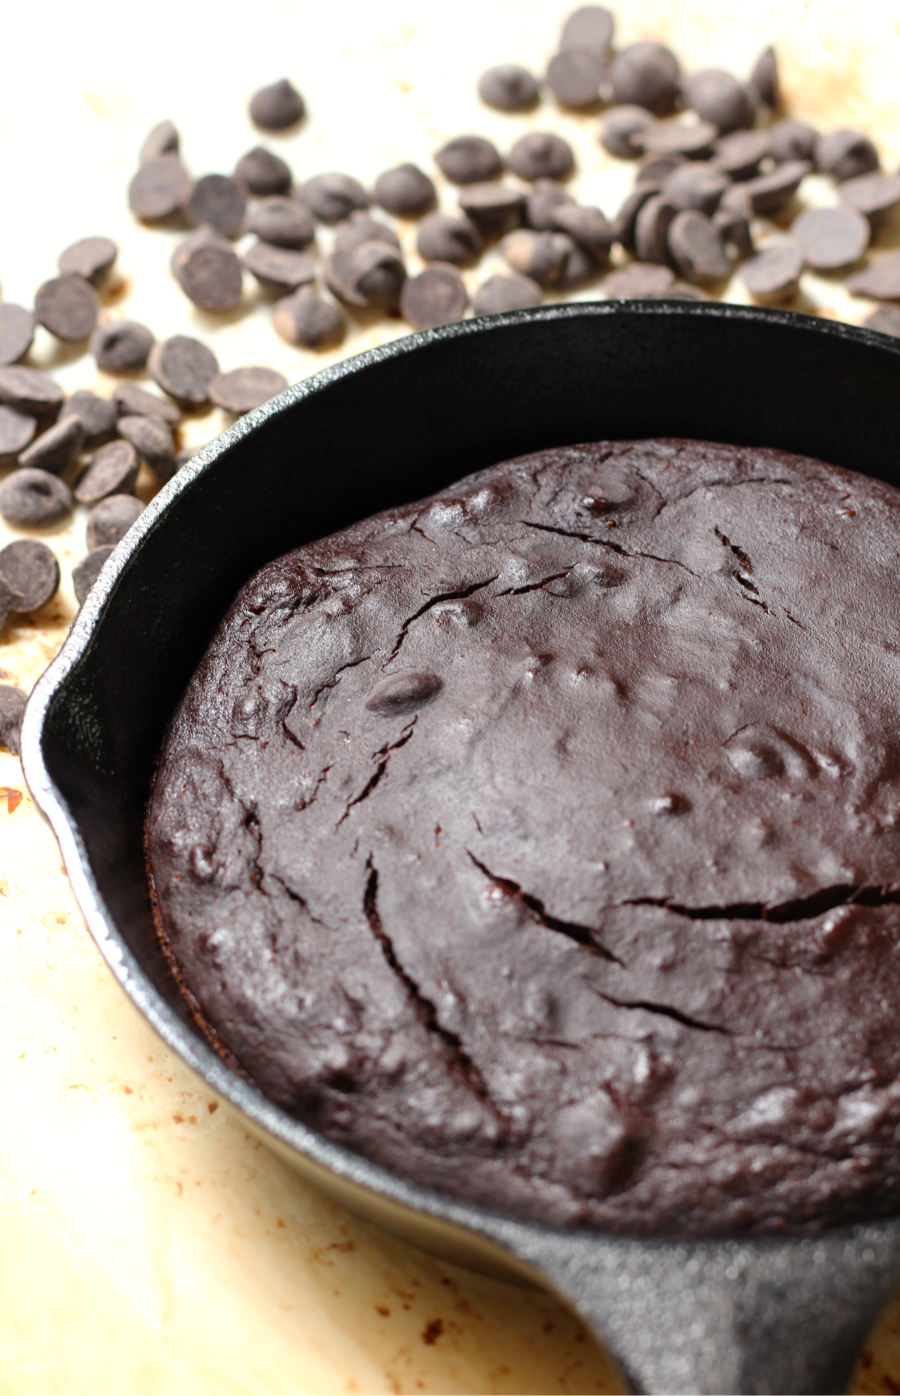 Double Chocolate Skillet Brownie (Gluten-Free, Vegan, Allergy-Free) | Strength and Sunshine @RebeccaGF666 A Double Chocolate Skillet Brownie for one! Gluten-free, vegan, and allergy-free, get ready to bake up a delicious chocolatey dessert right in your cast iron skillet! You can't have too many brownie recipes and one you can eat with a spoon? There's always room for that!